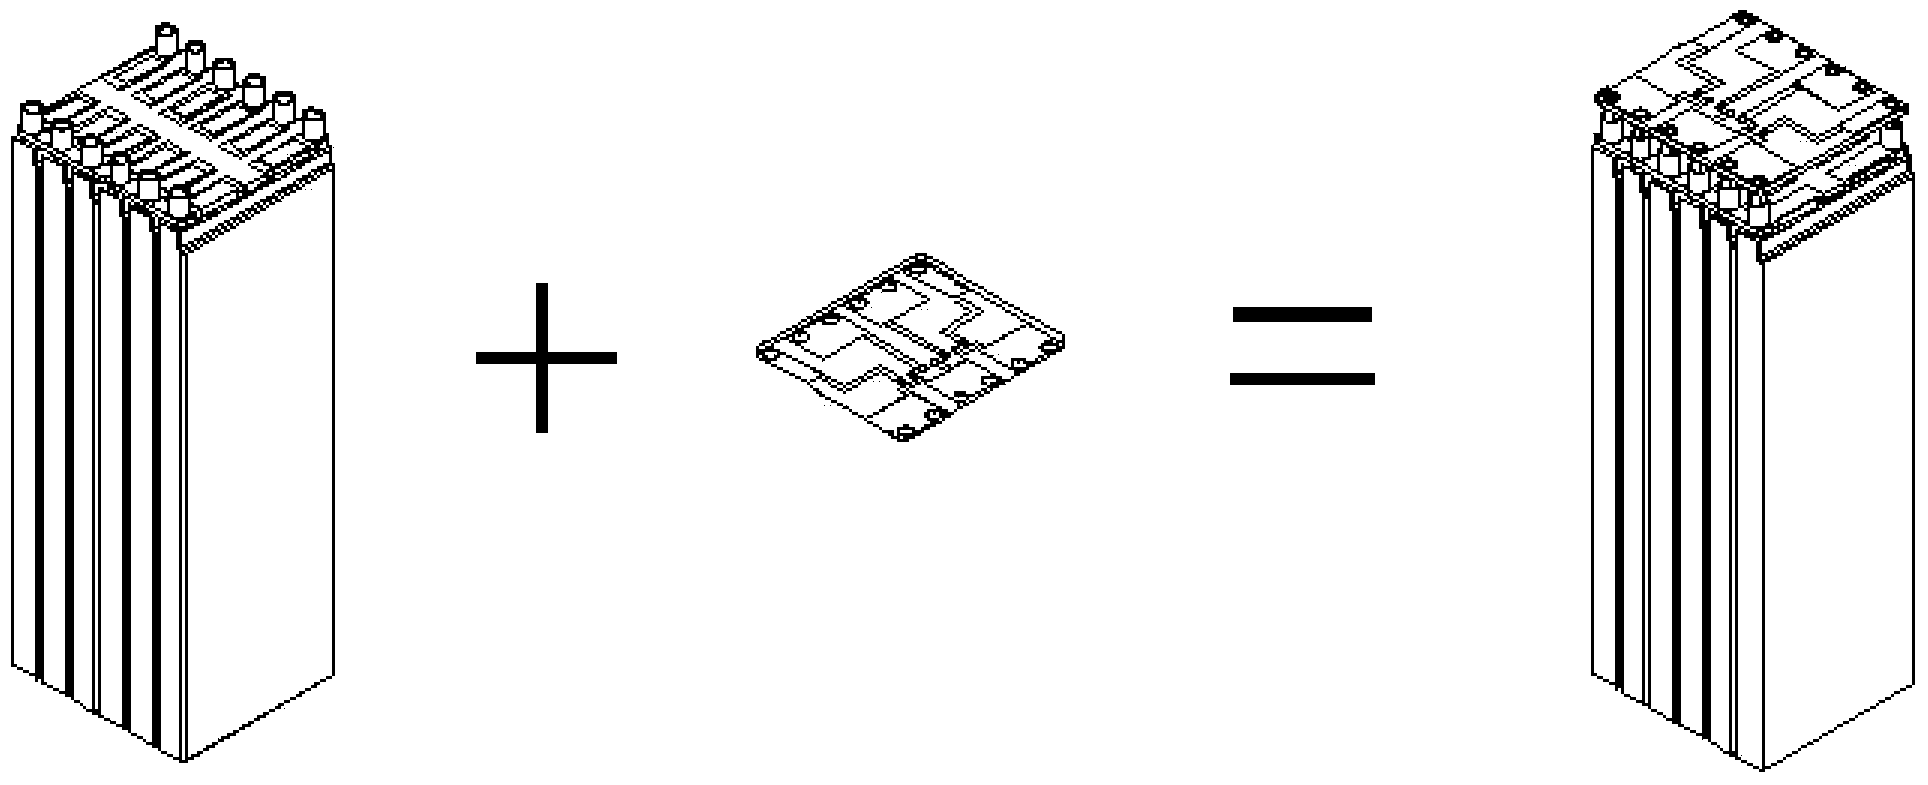 Lithium ion battery pack capable of outputting multiple voltages